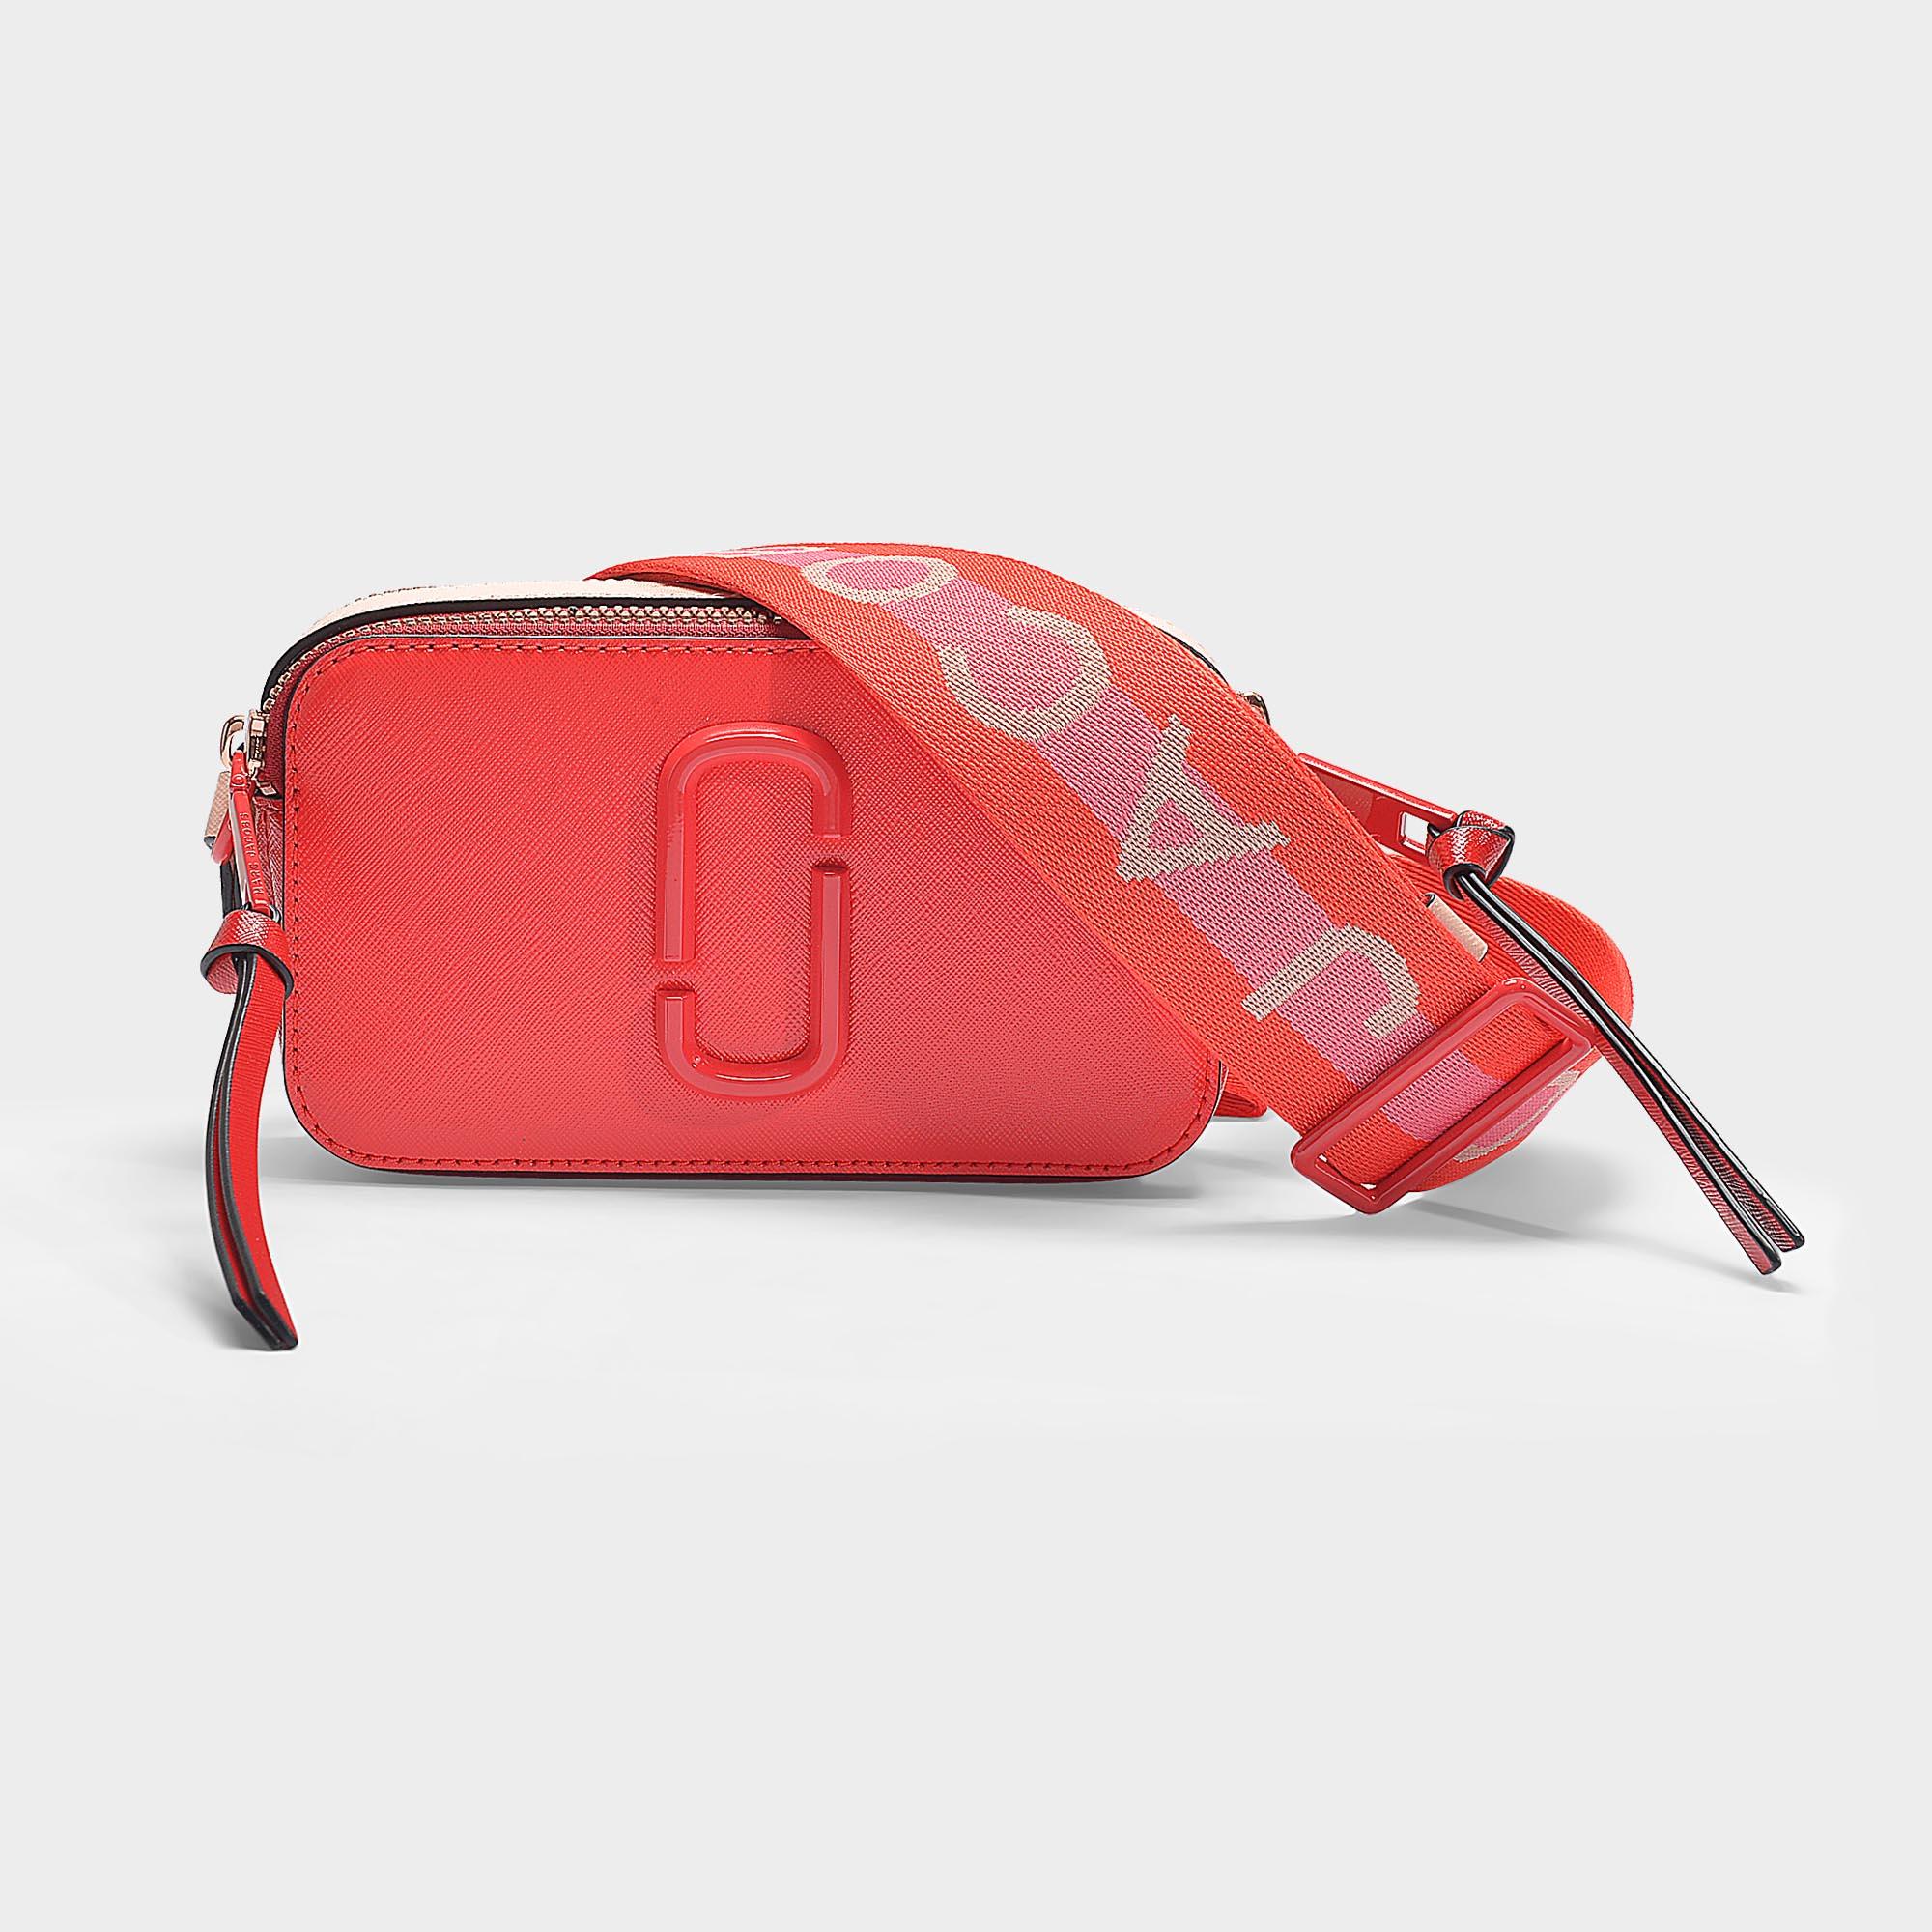 Marc Jacobs Snapshot Bag In Poppy Red Leather With Polyurethane Coating in  Pink | Lyst